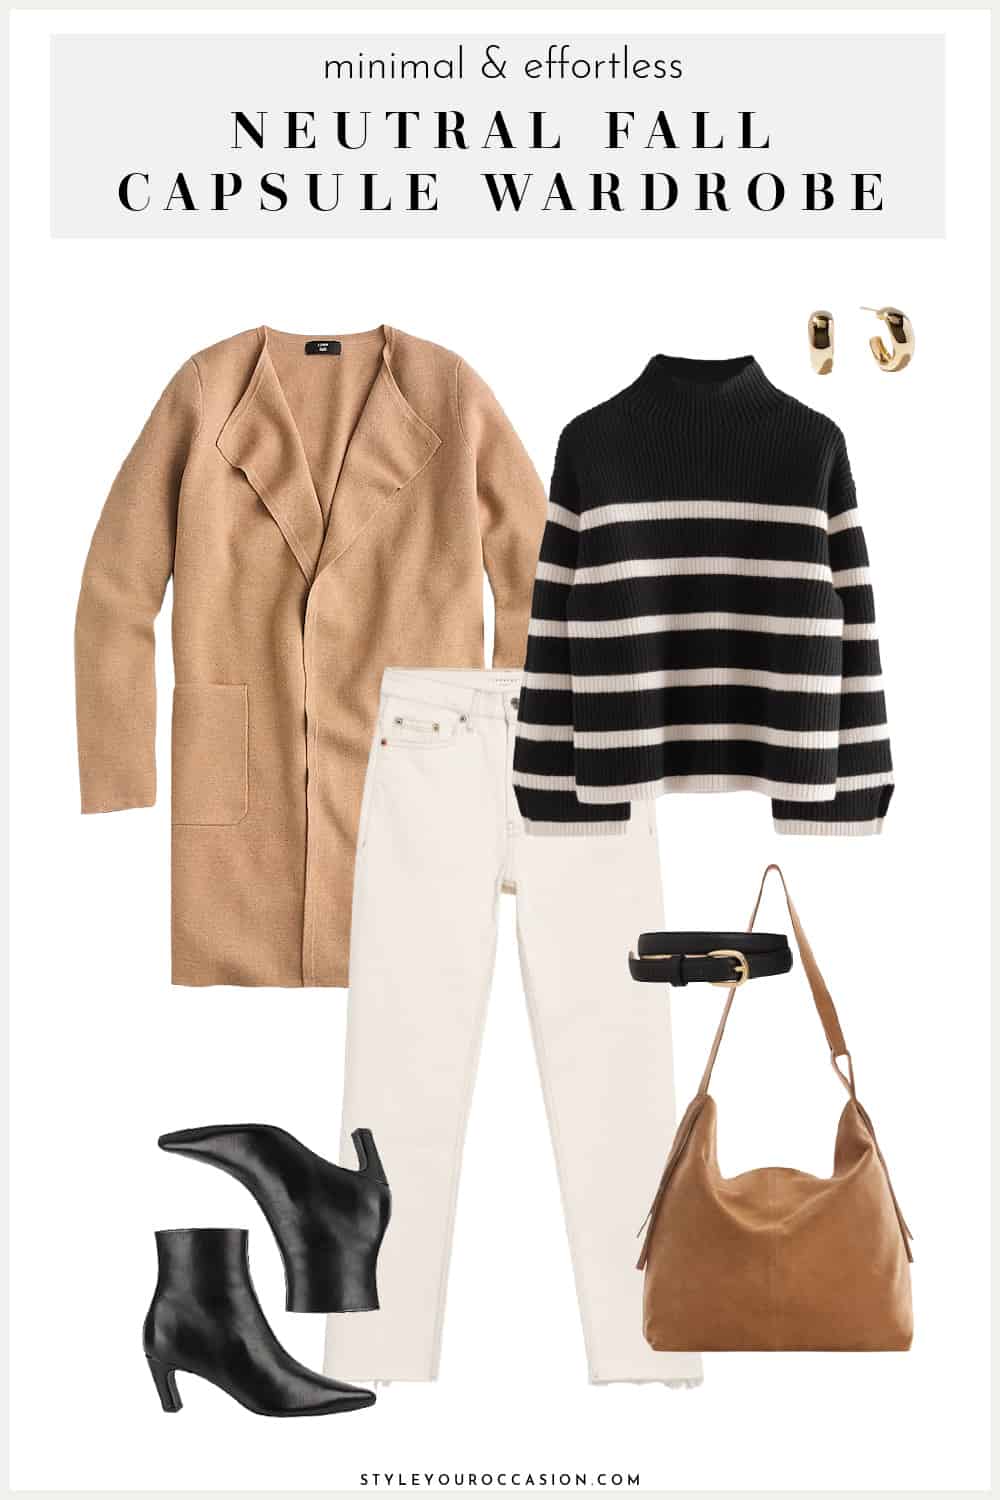 fall capsule wardrobe outfit with camel coat cardigan, striped sweater, off-white jeans, black boots, and suede bag